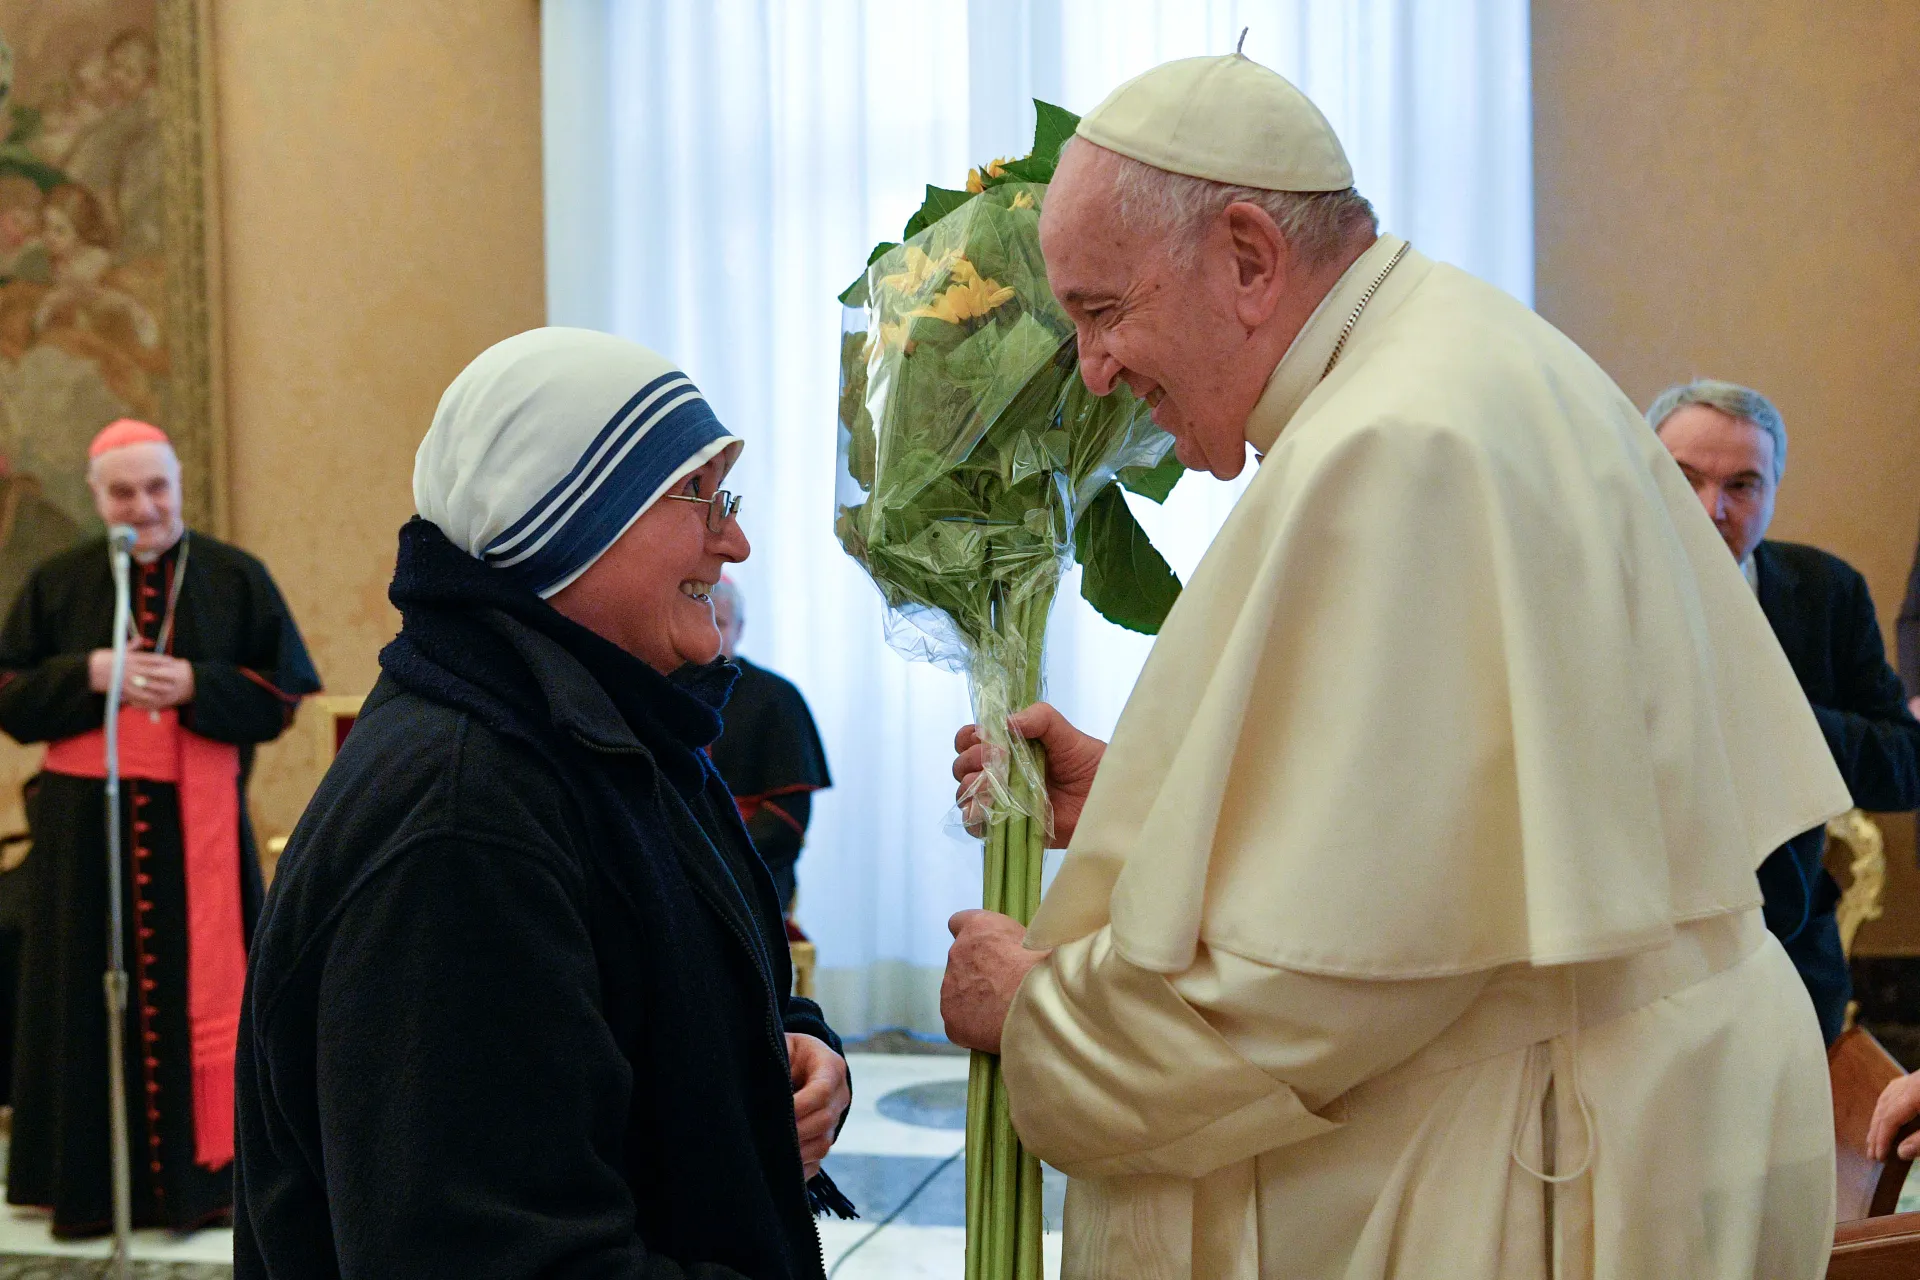 Pope Francis celebrated his 86th birthday with the Missionaries of Charity, honoring three people who care for “the poorest of the poor” with the Mother Teresa Award on Dec. 17, 2022.?w=200&h=150